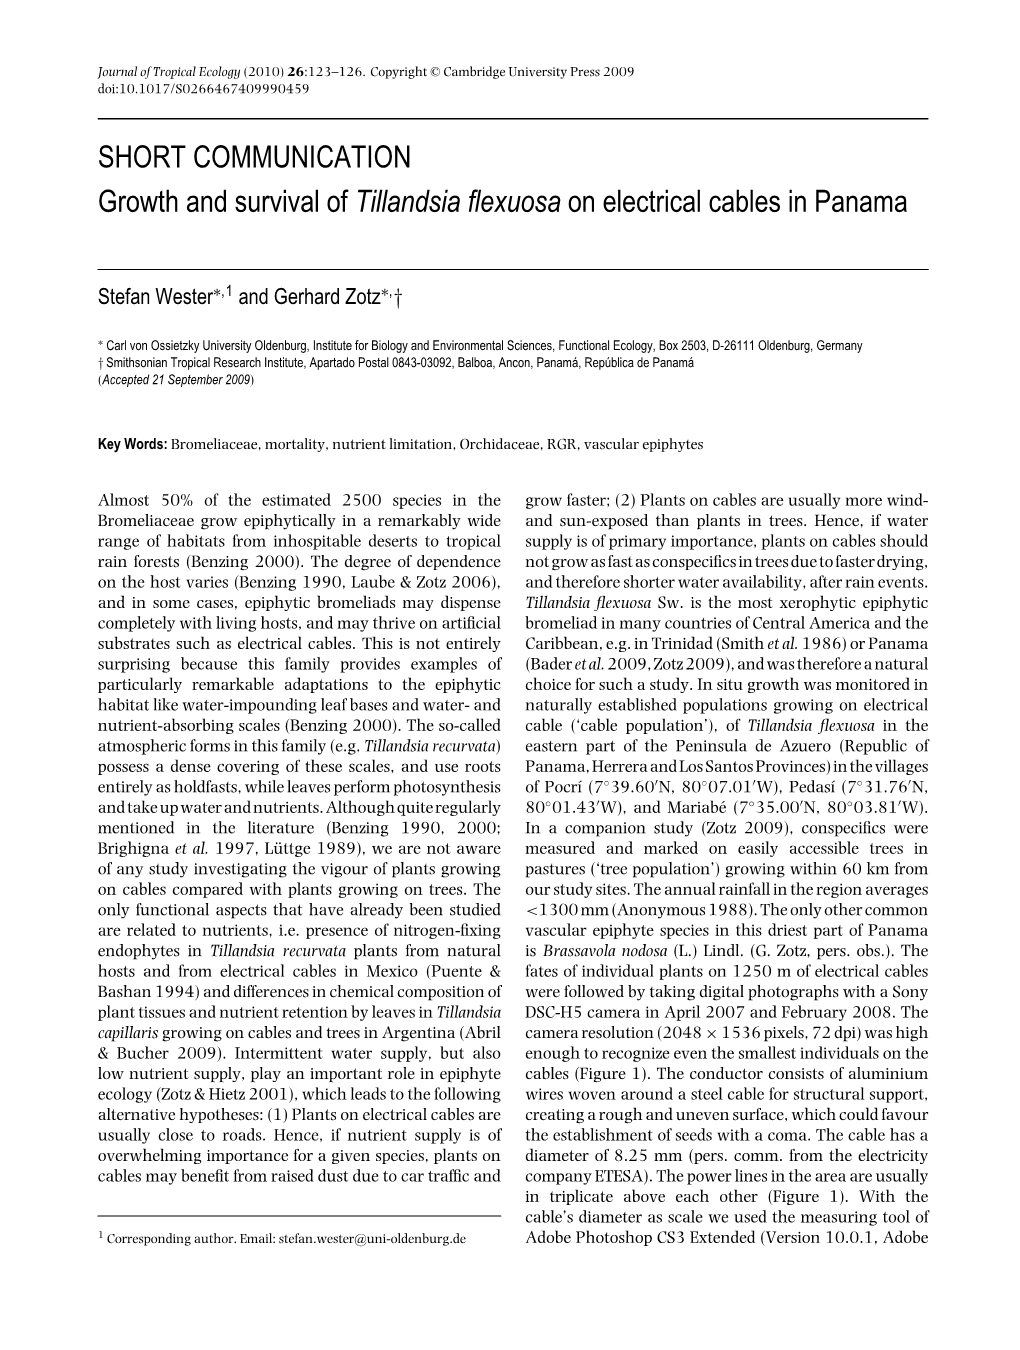 Growth and Survival of Tillandsia Flexuosa on Electrical Cables In